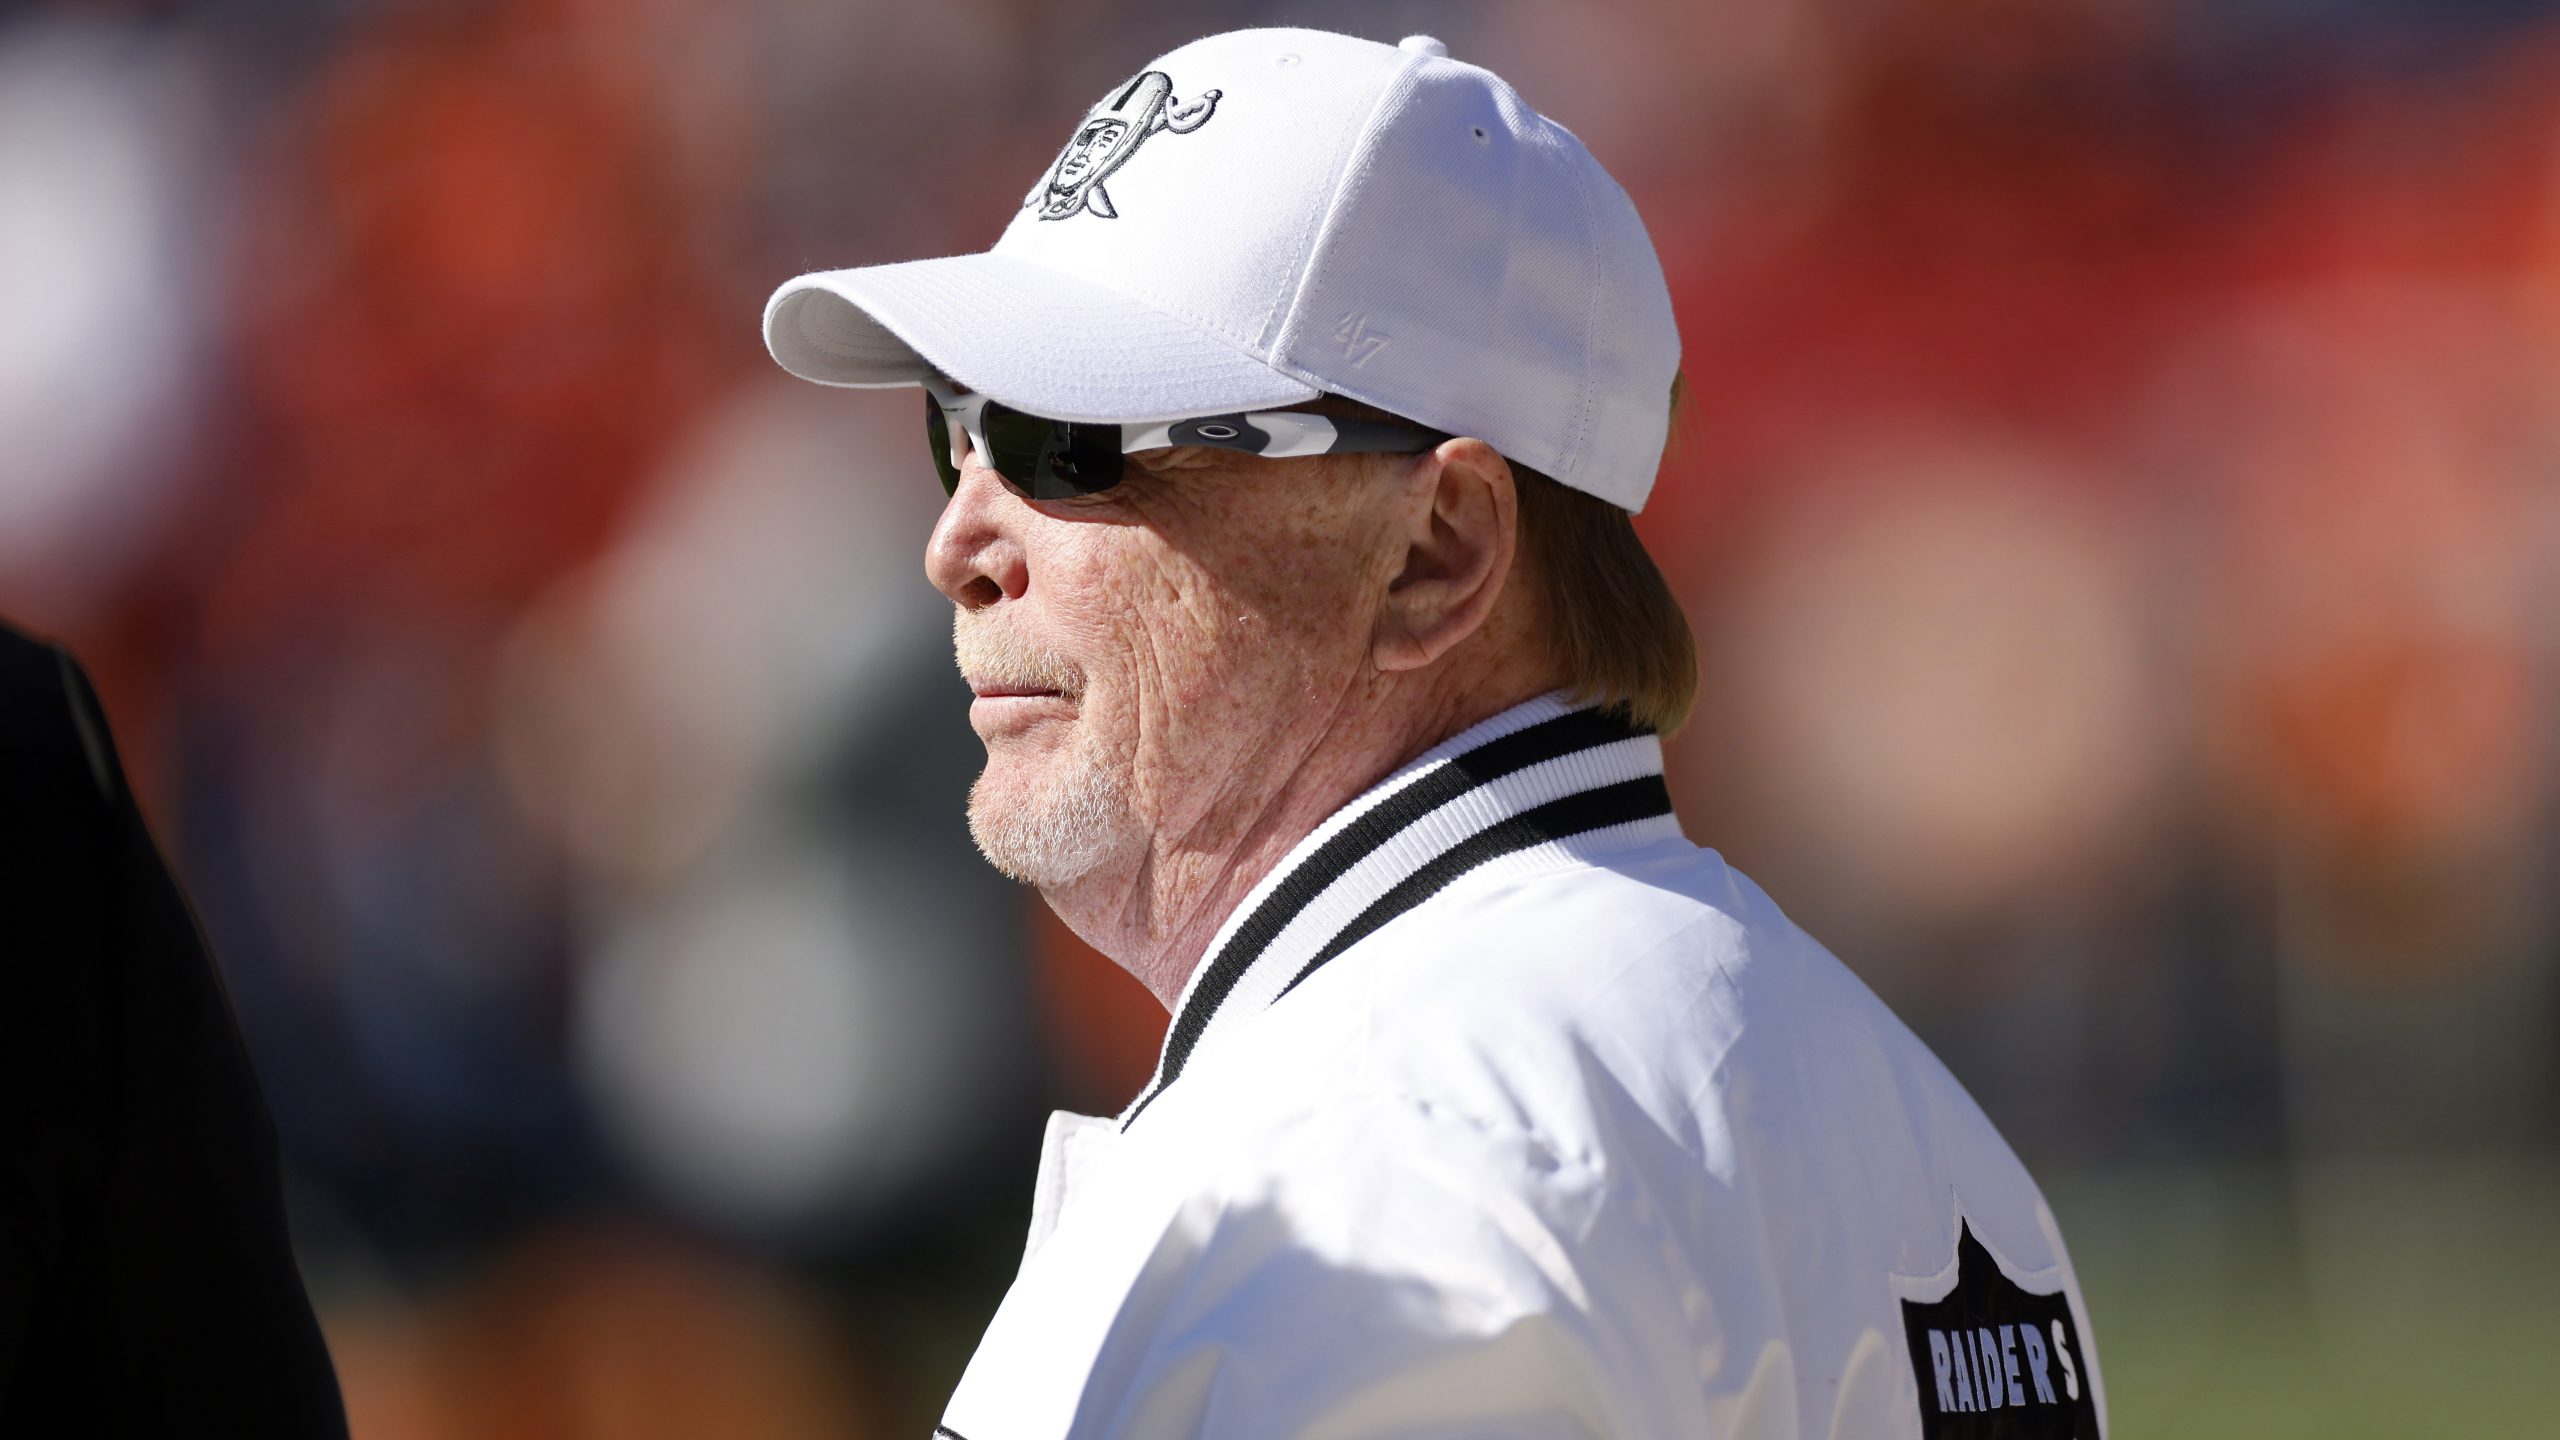 Raiders’ Mark Davis calls for NFL to release report on WFT investigation, takes dig over Gruden scandal